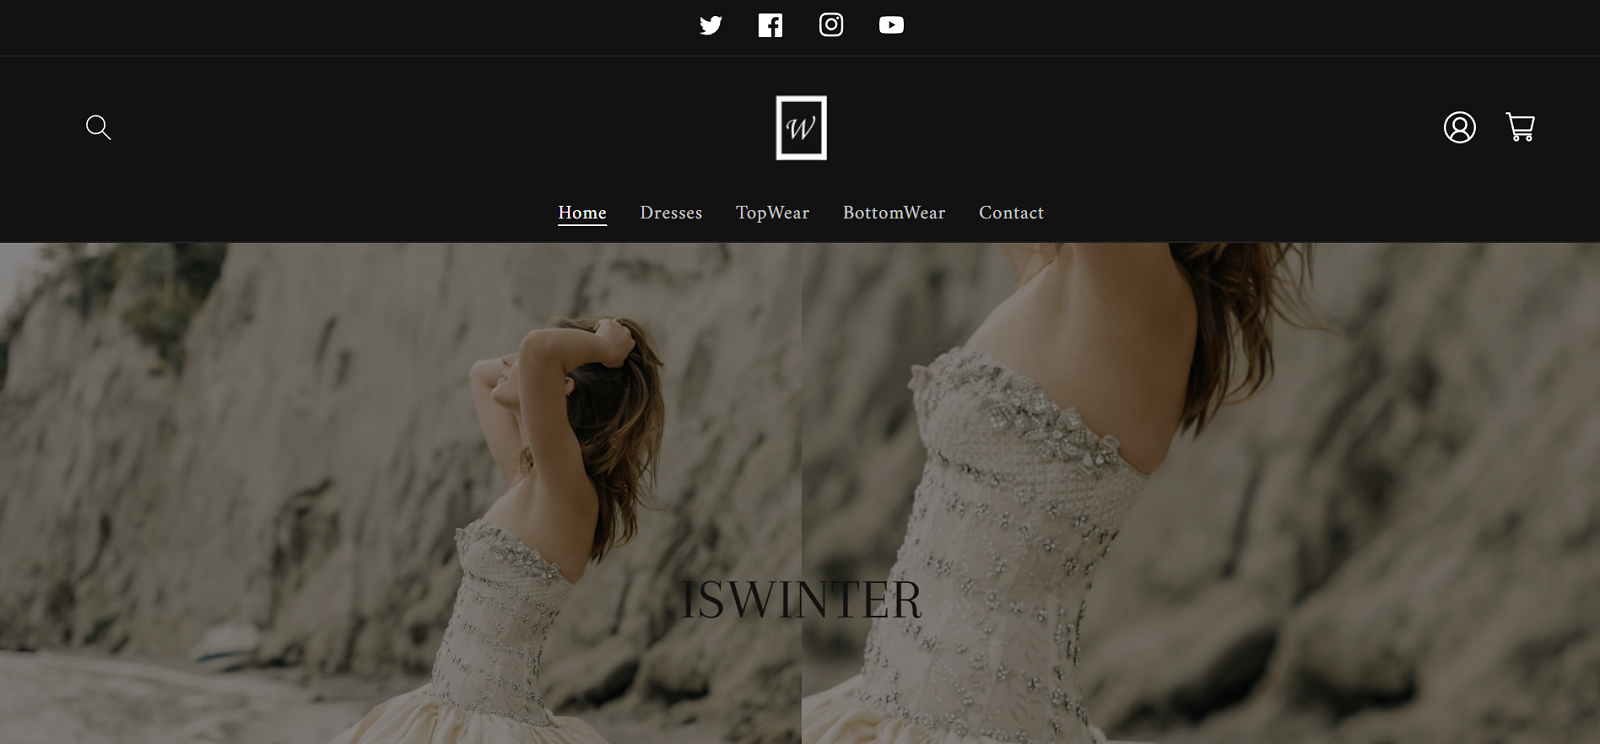 Iswinter -  Shopify Theme